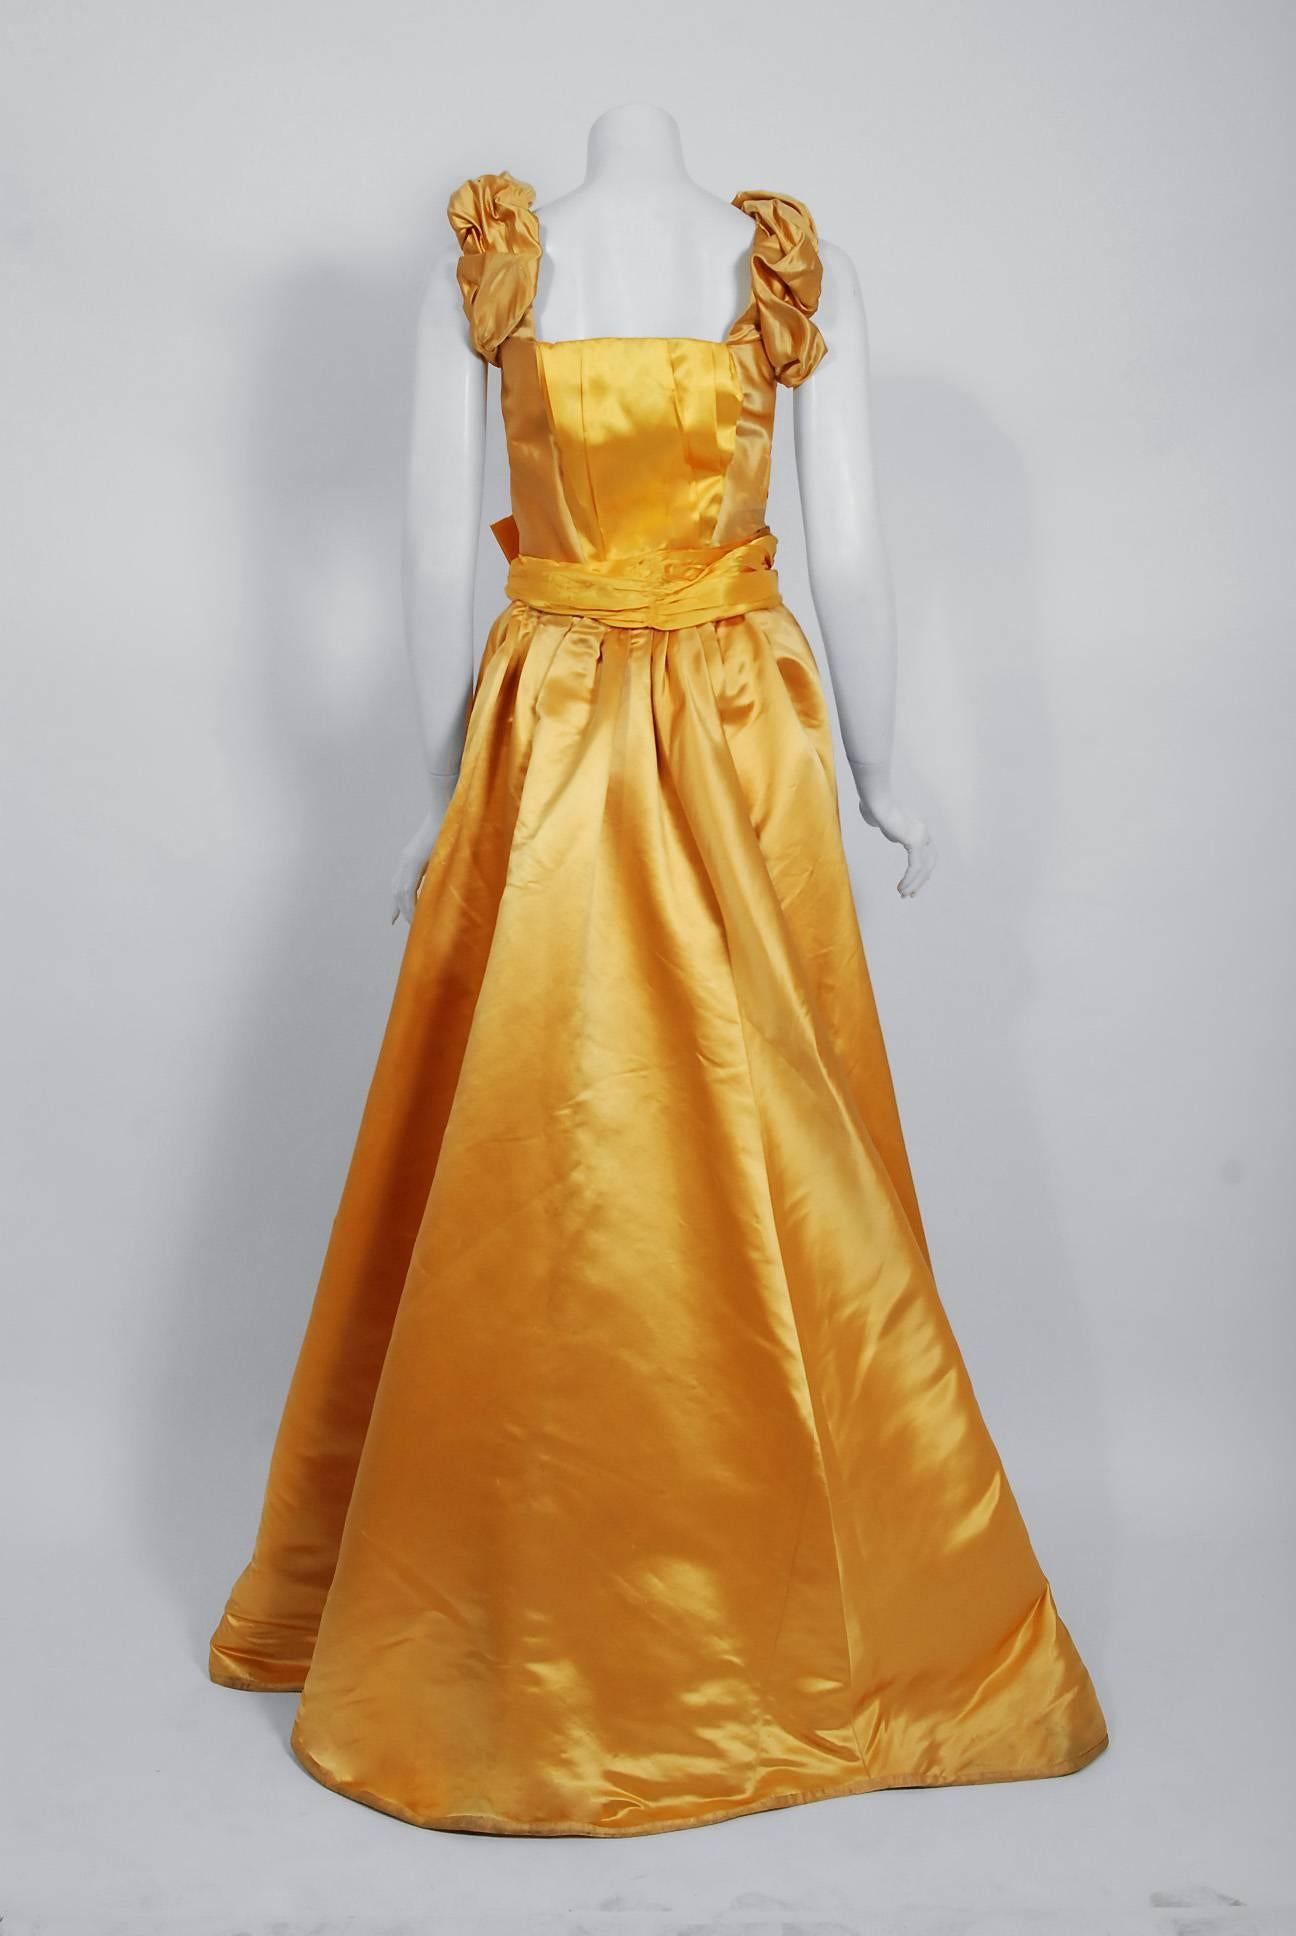 Women's Antique 1890's Victorian French Couture Floral Embroidered Yellow Satin Gown For Sale